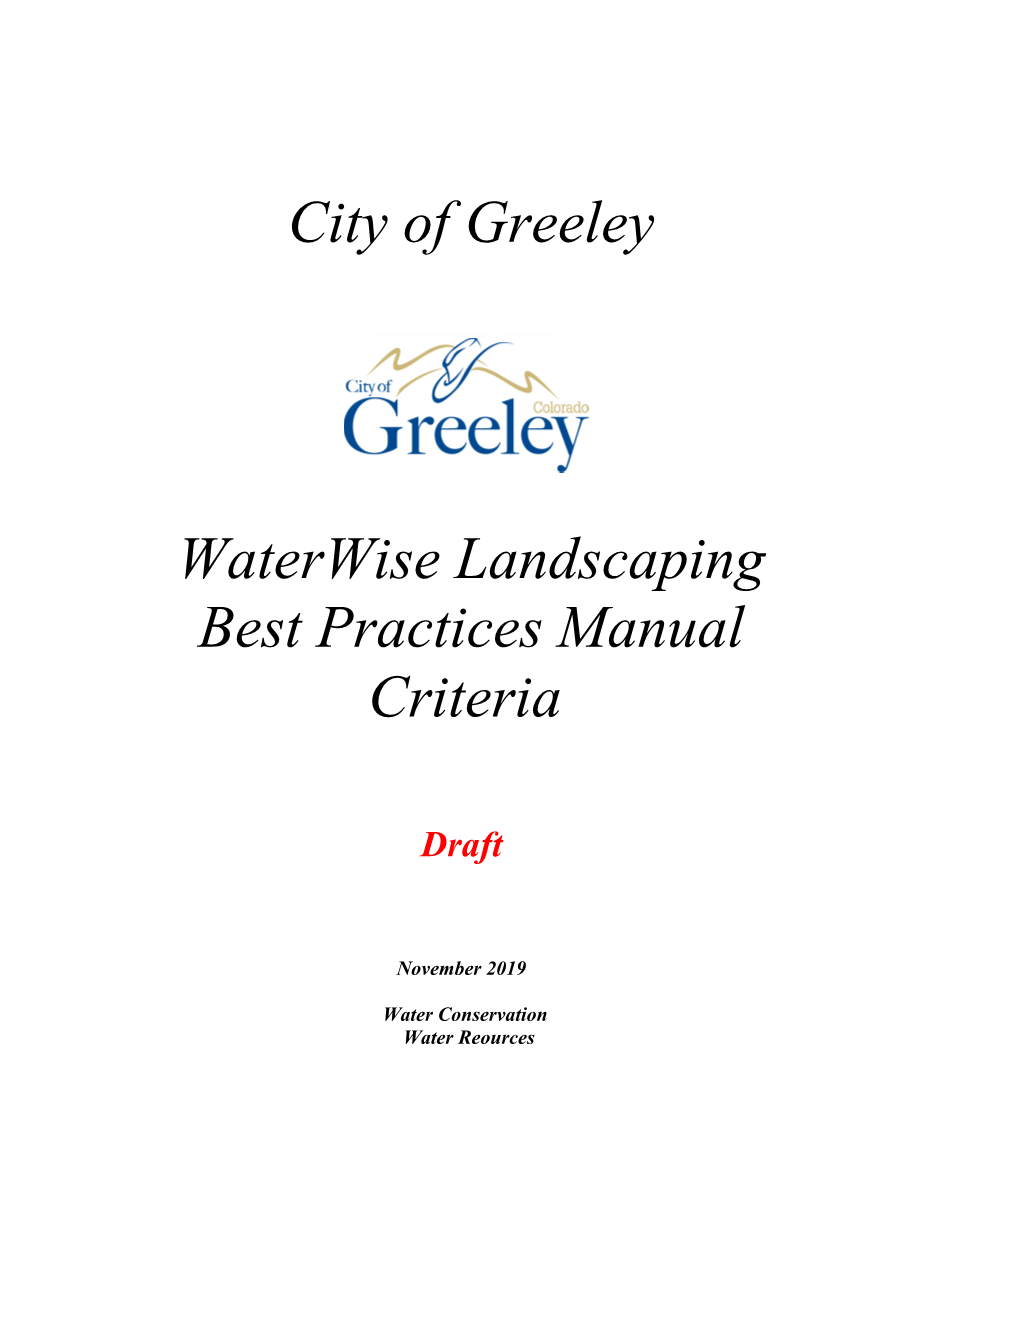 City of Greeley Waterwise Landscaping Best Practices Manual